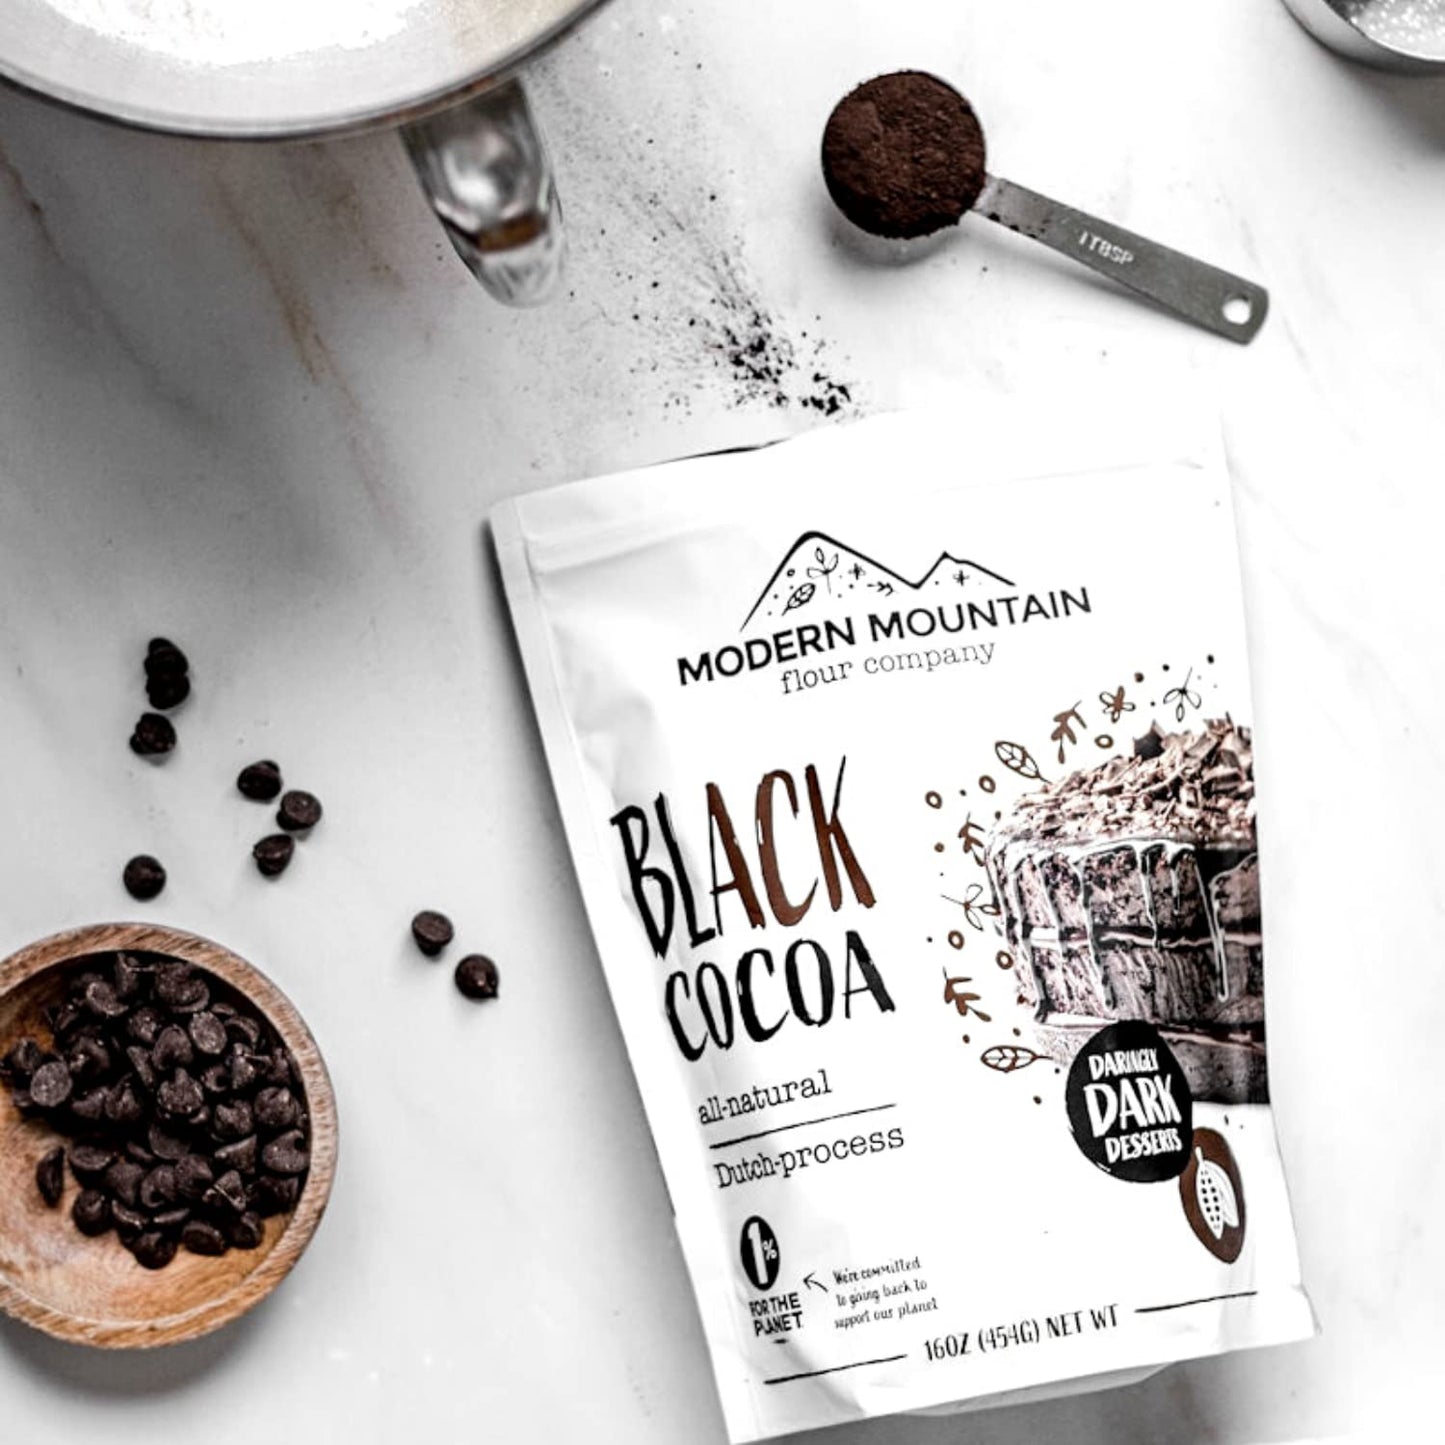 Black Cocoa Powder (1 lb) Bake the Darkest Chocolate Baked Goods, Achieve Rich Chocolate Flavor, All-Natural Substitute for Black Food Coloring, Dutch-Processed Cocoa Powder, Unsweetened, Extra Dark